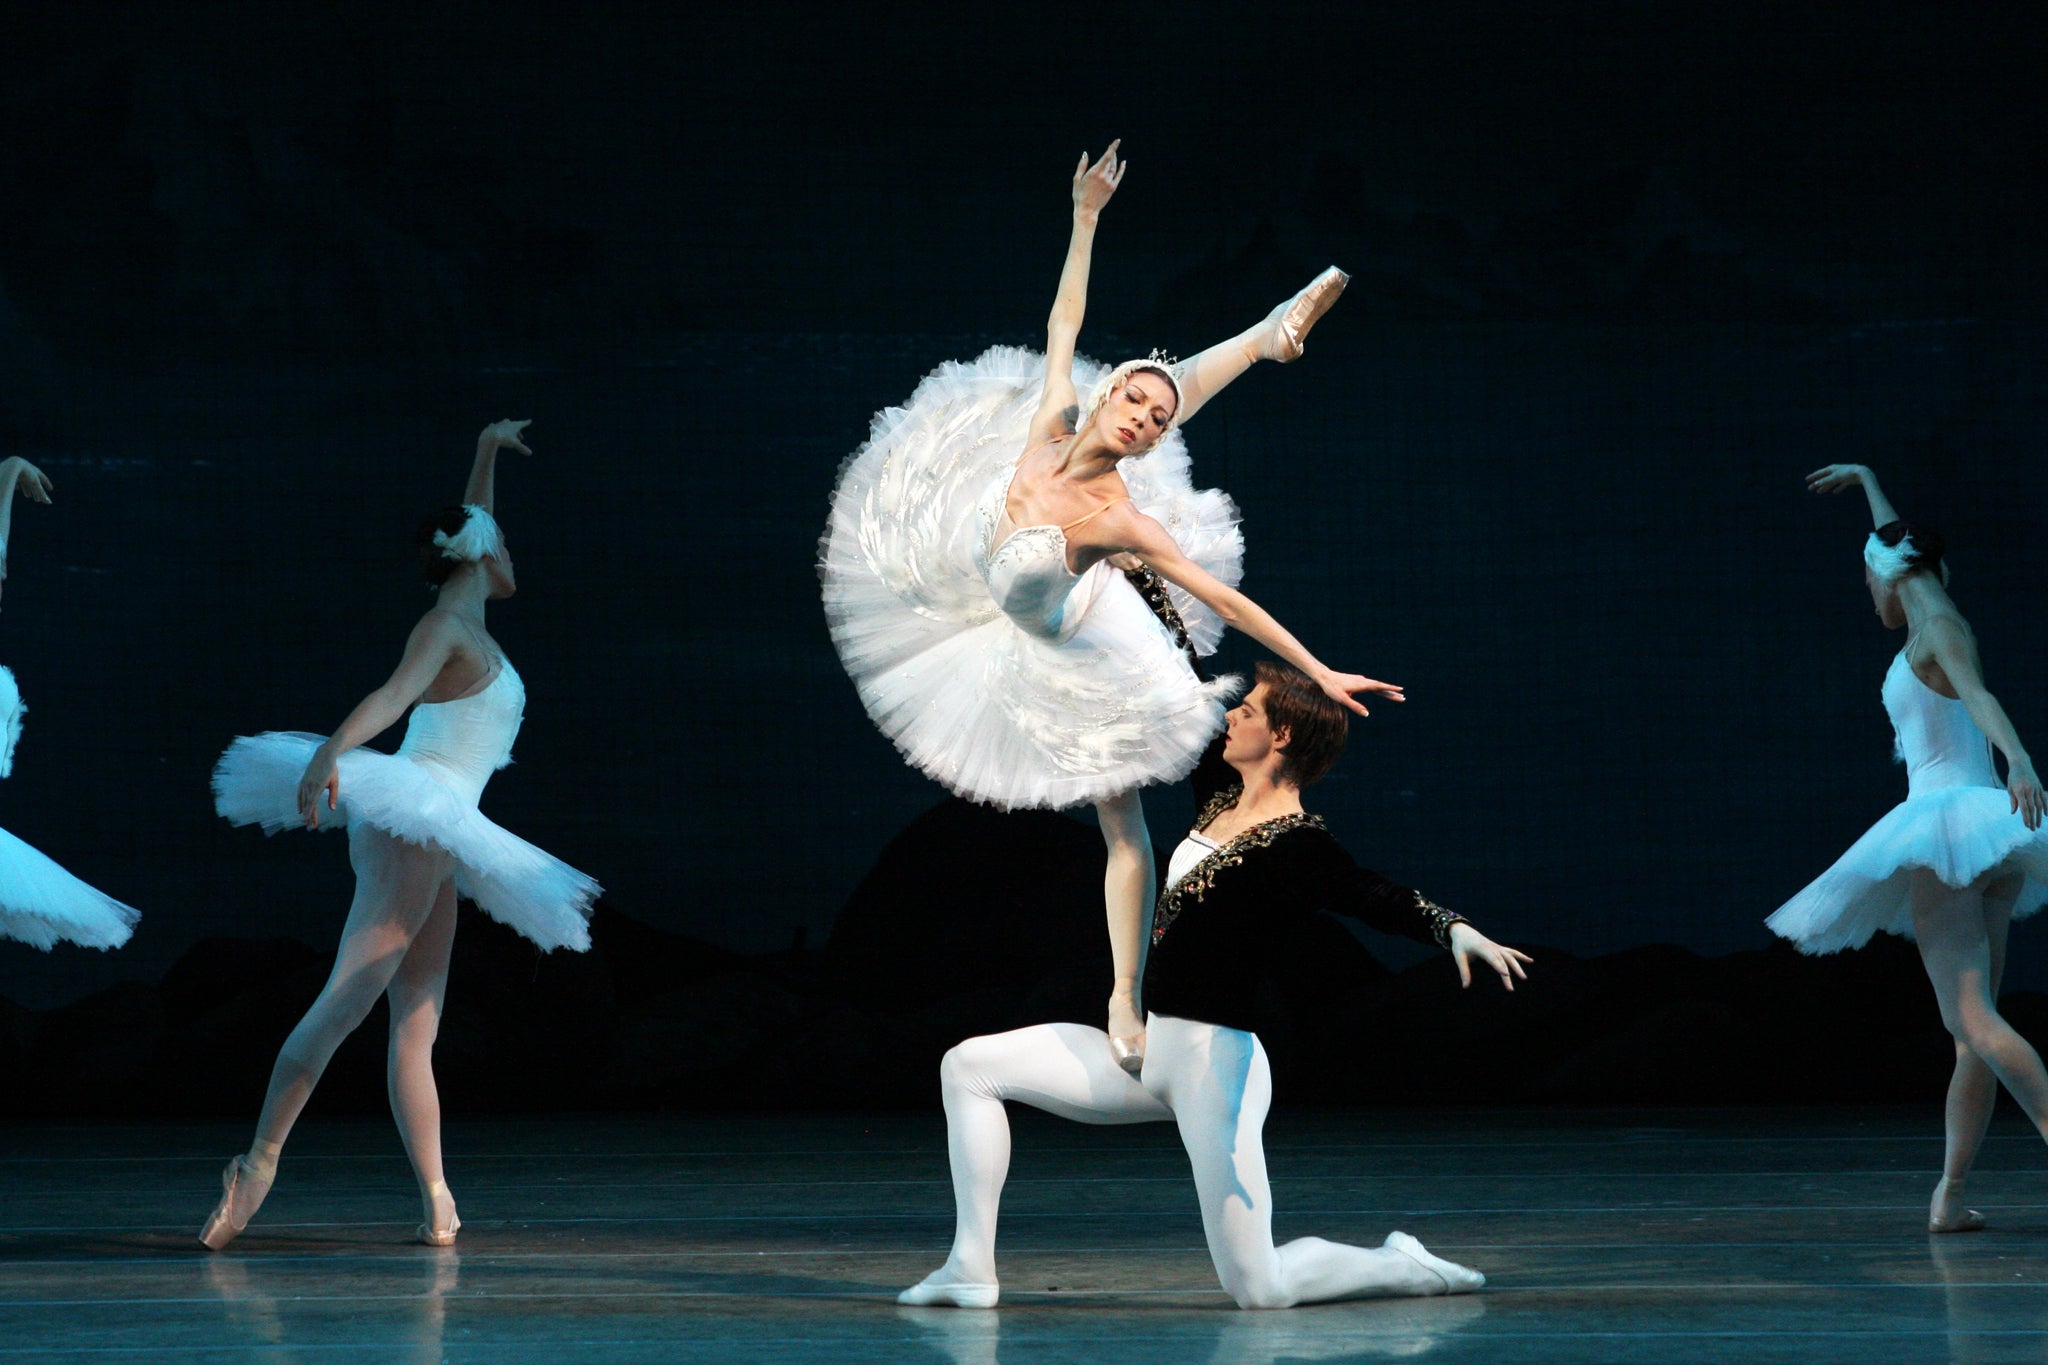 Swan Lake Royal Opera House Review The Mariinsky Ballet Is Back On Home Ground The Independent